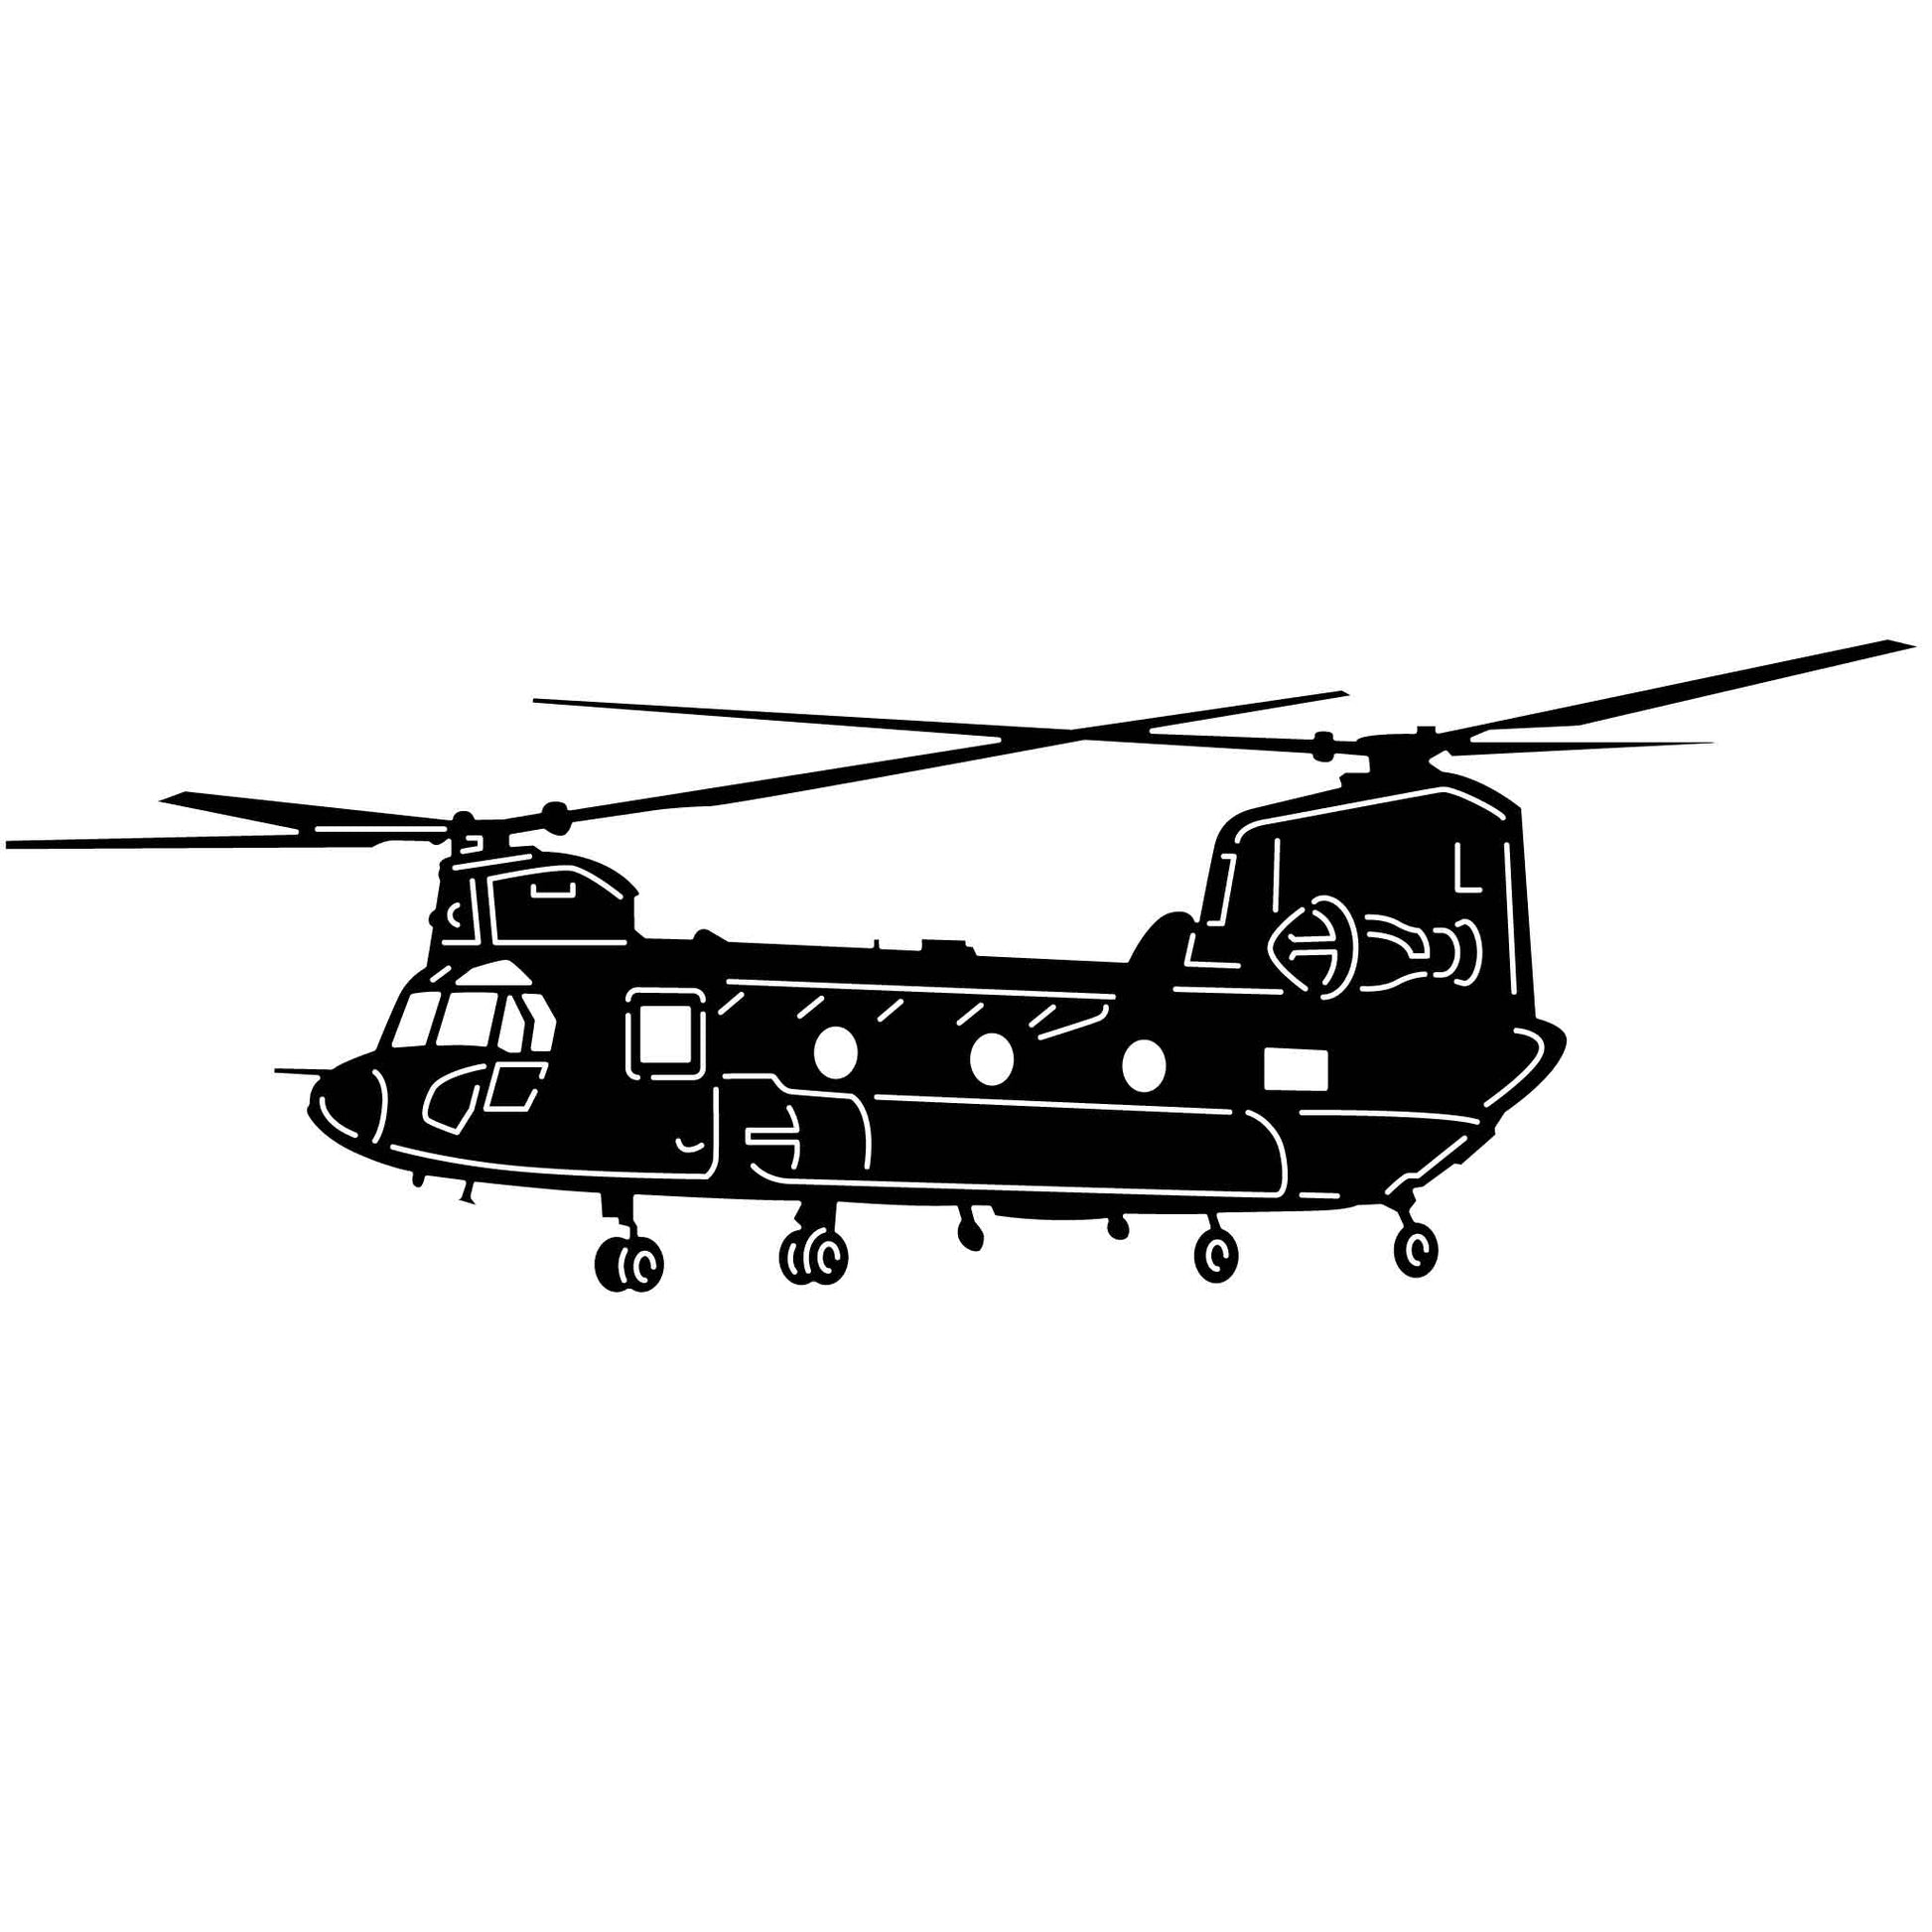 Military Aircraft Helicopter Boeing CH-47 Chinook American heavy-lift twin-engine